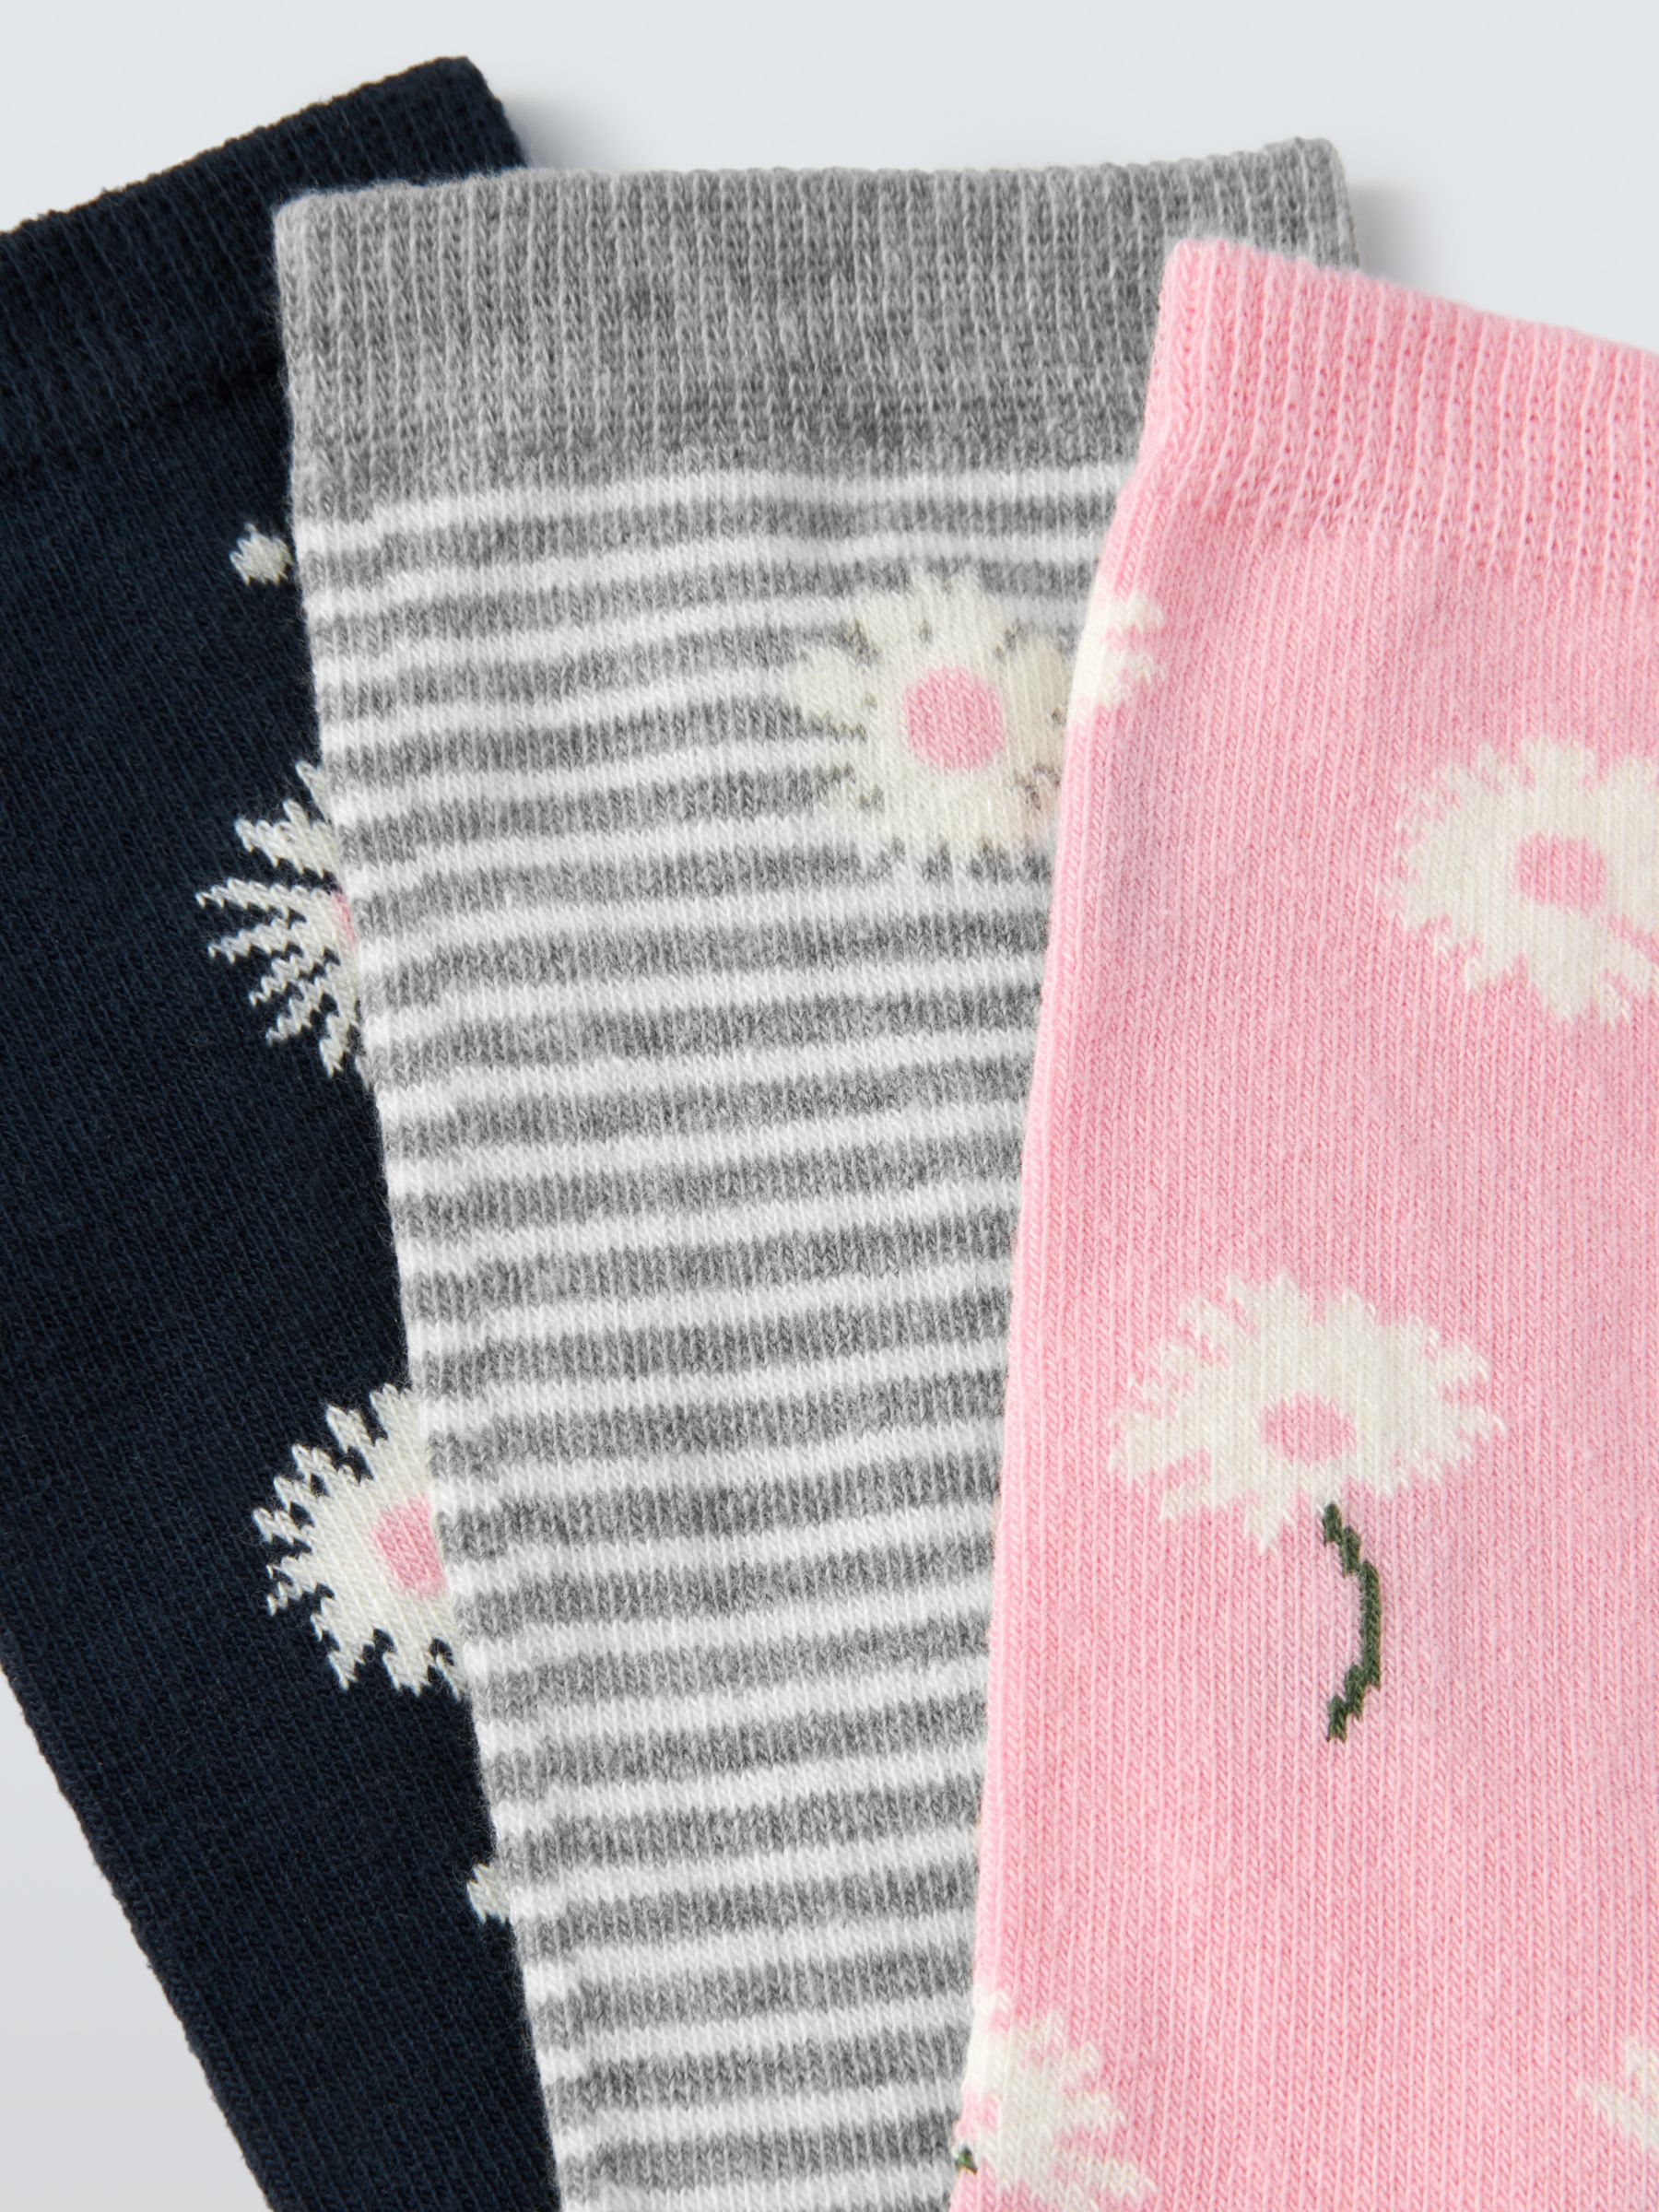 Buy John Lewis Daisy Print Cotton Mix Ankle Socks, Pack of 3, Grey/Multi Online at johnlewis.com